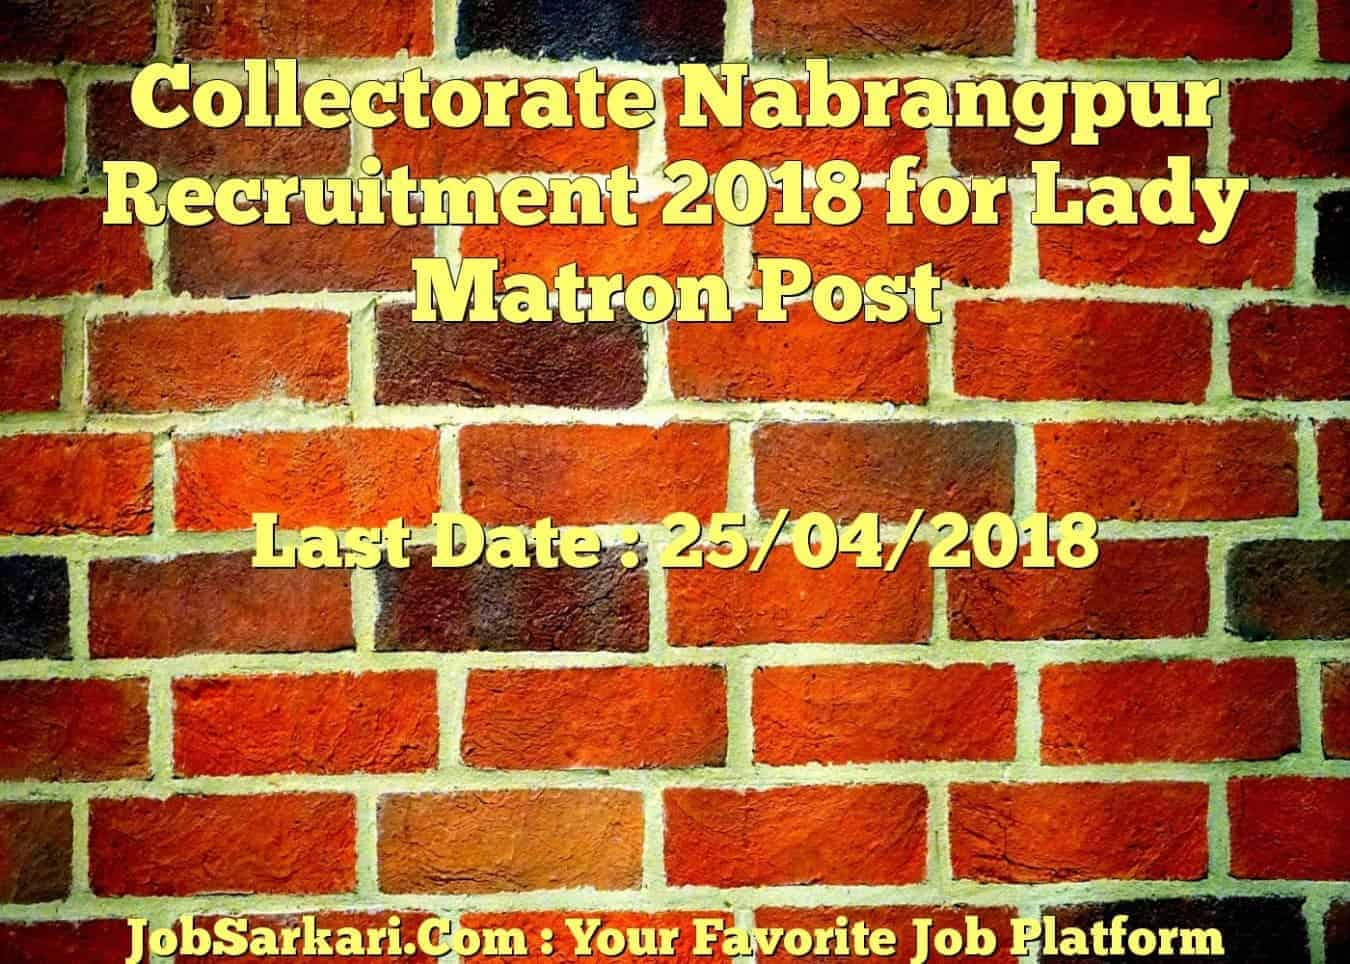 Collectorate Nabarangpur Recruitment 2018 for Lady Matron Post